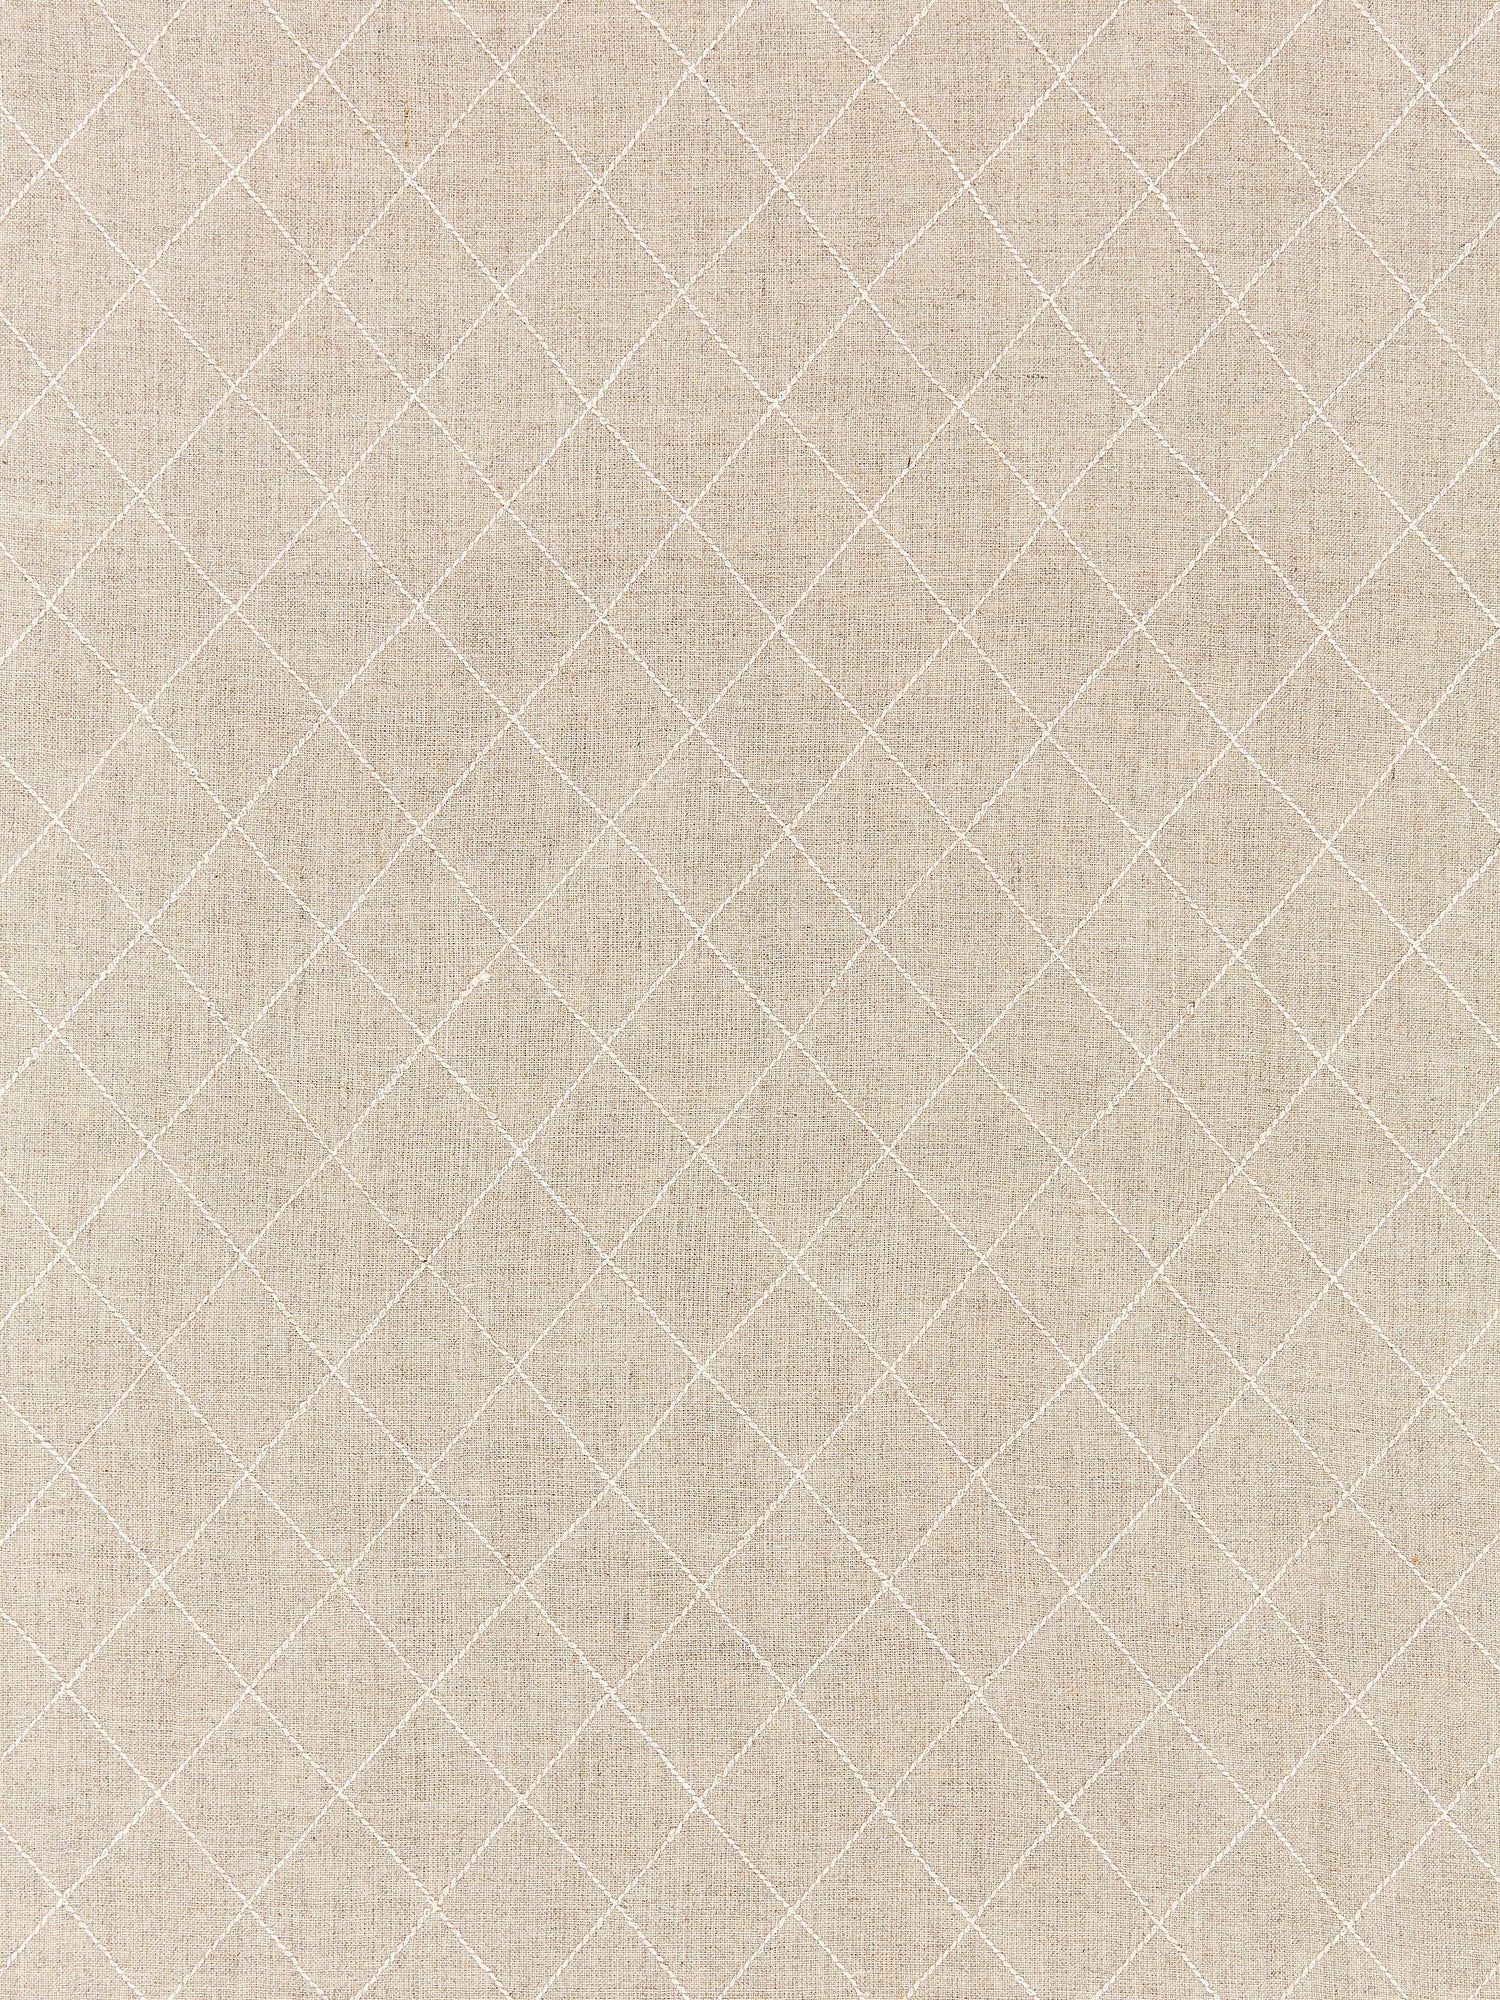 Counterpane fabric in natural color - pattern number SC 000127150 - by Scalamandre in the Scalamandre Fabrics Book 1 collection